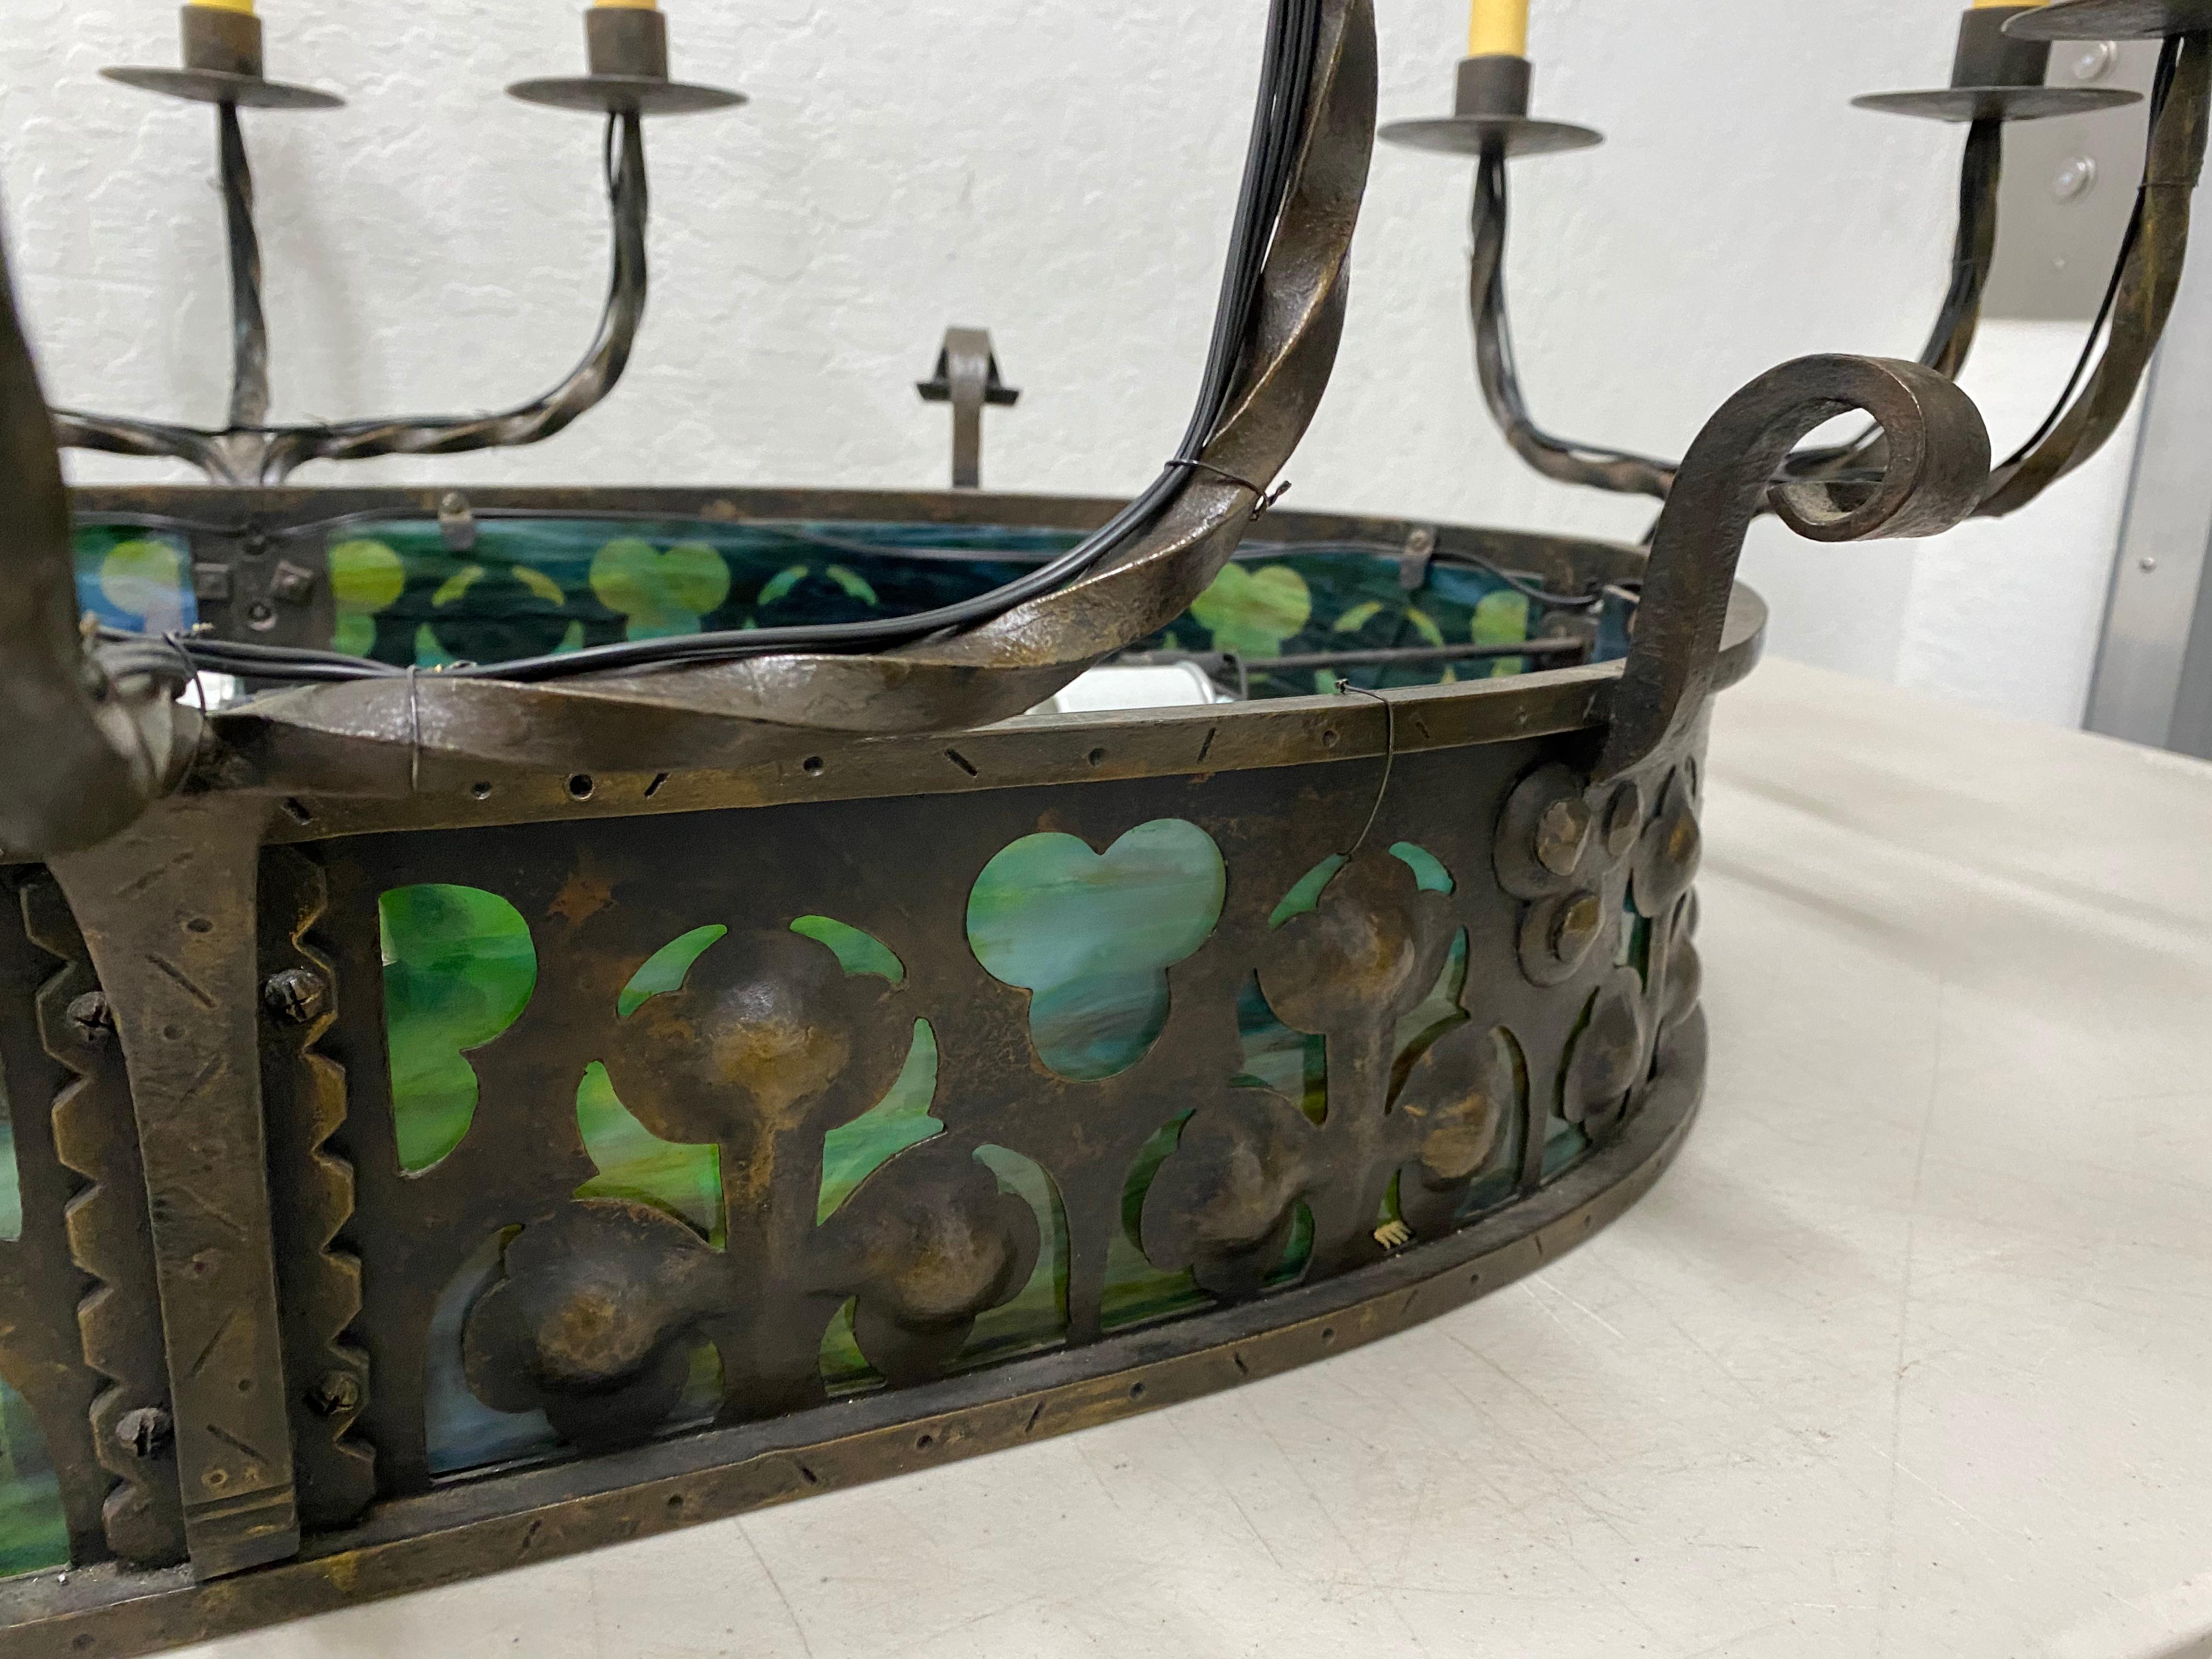 19th century French Gothic wrought iron and stained glass 12-light chandelier

Outstanding large scale chandelier.

Hand wrought iron chandelier with panels of stained glass surrounding the apron.

There is a small crack in one stained glass